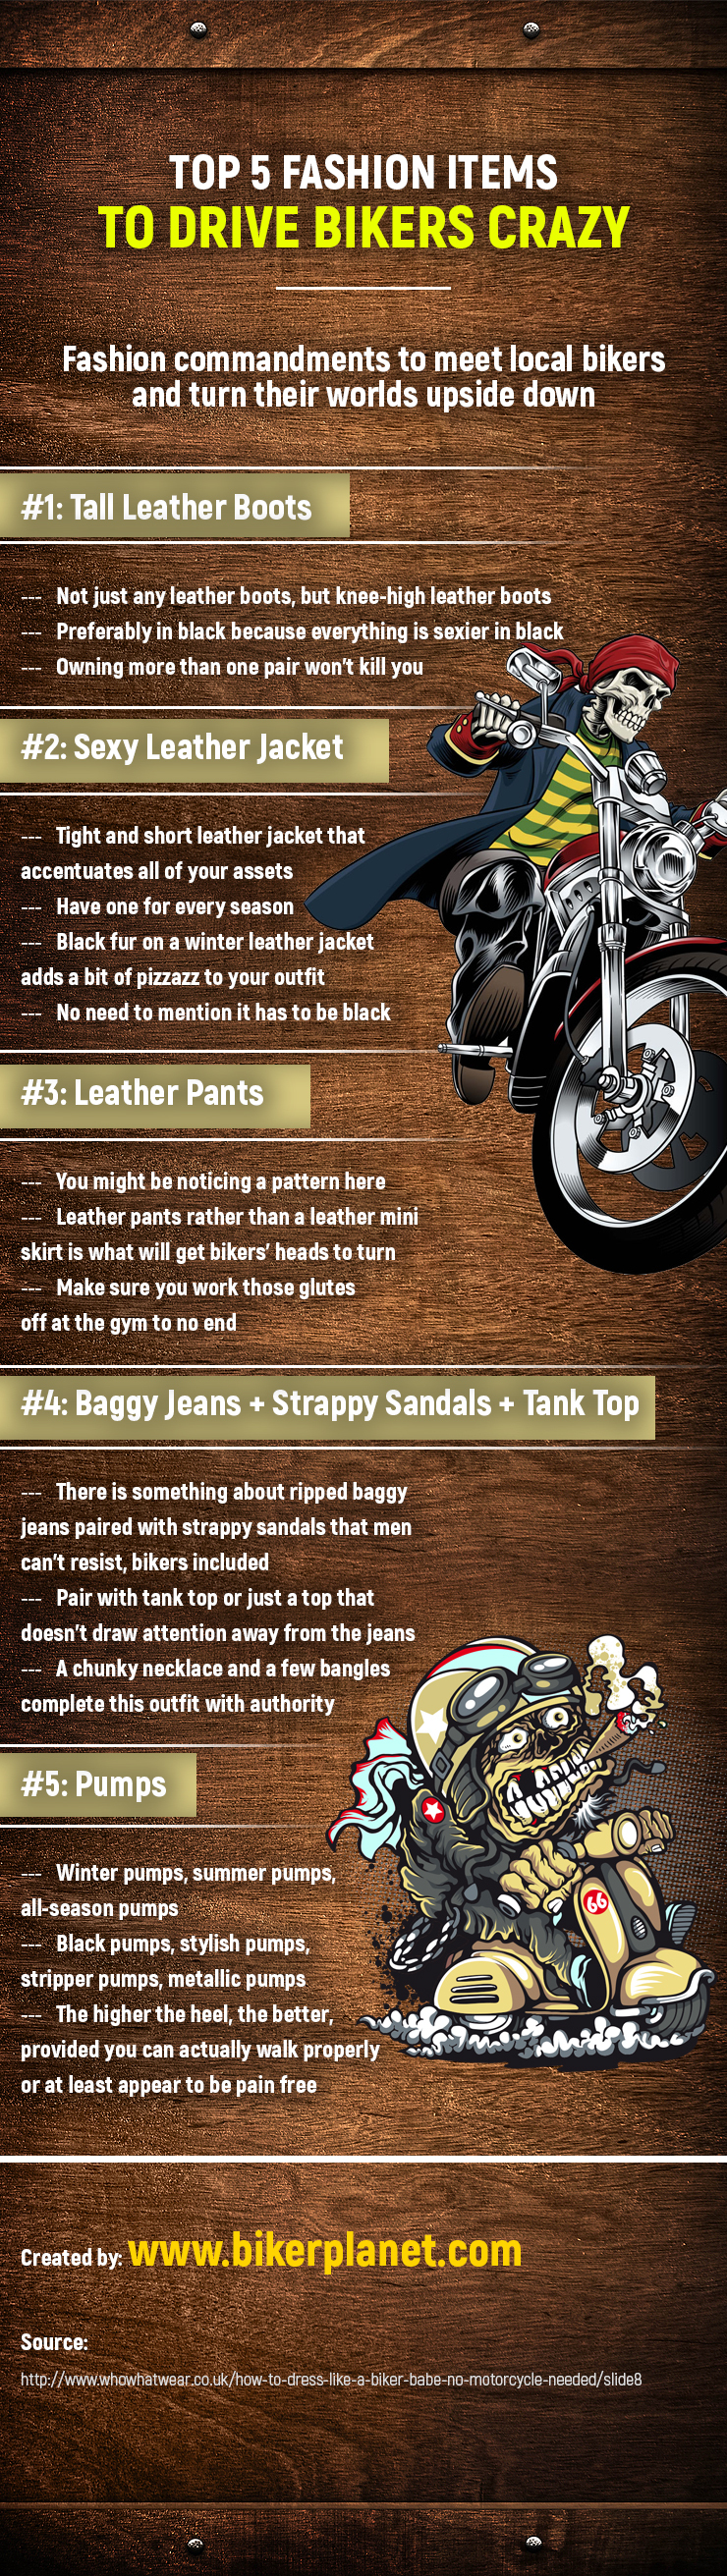 Top 5 Fashion Items To Drive Bikers Crazy